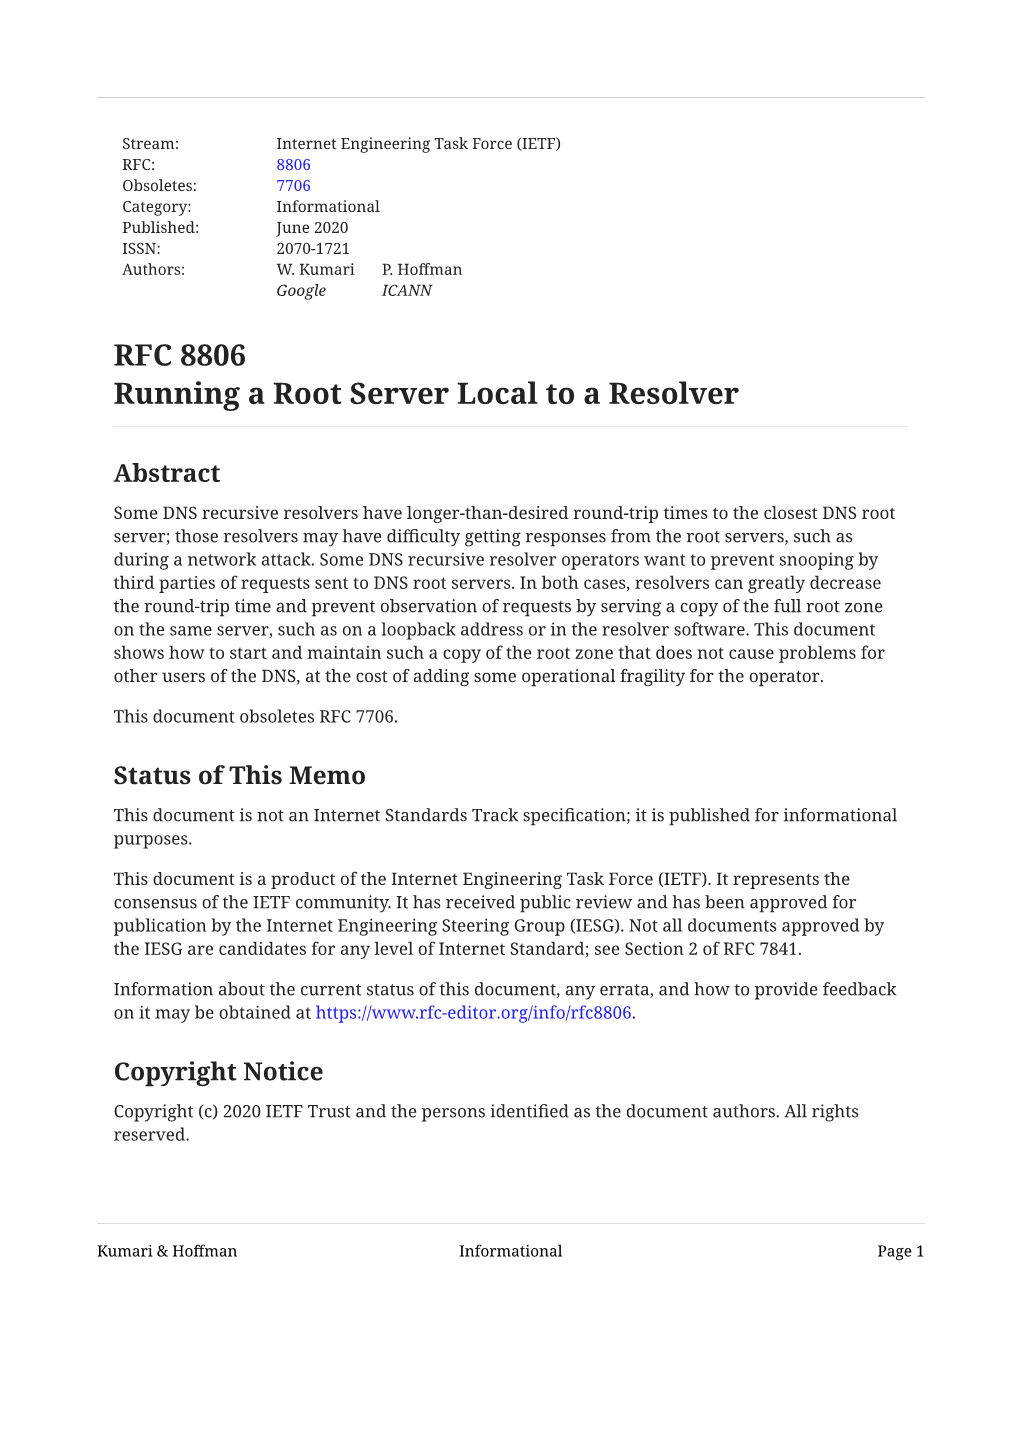 RFC 8806: Running a Root Server Local to a Resolver